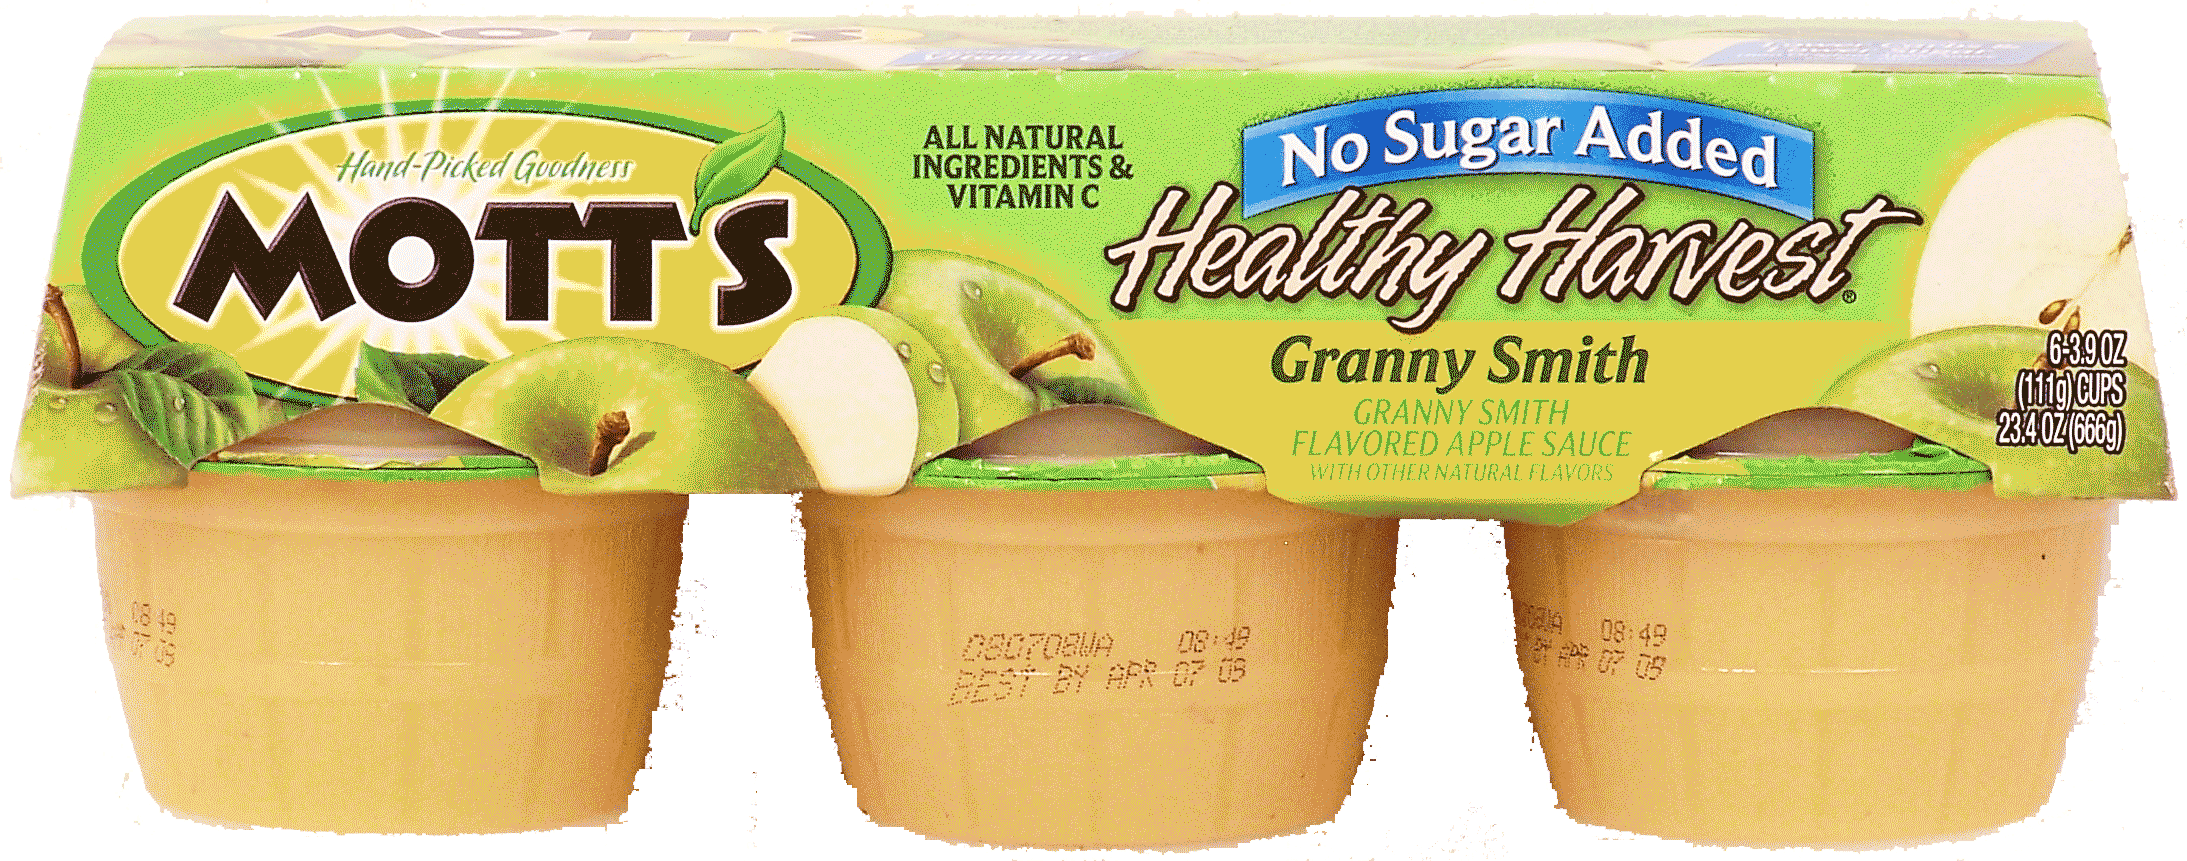 Mott's Healthy Harvest granny smith flavored applesauce with other natural flavors unsweetened, 6-3.9 oz cups Full-Size Picture